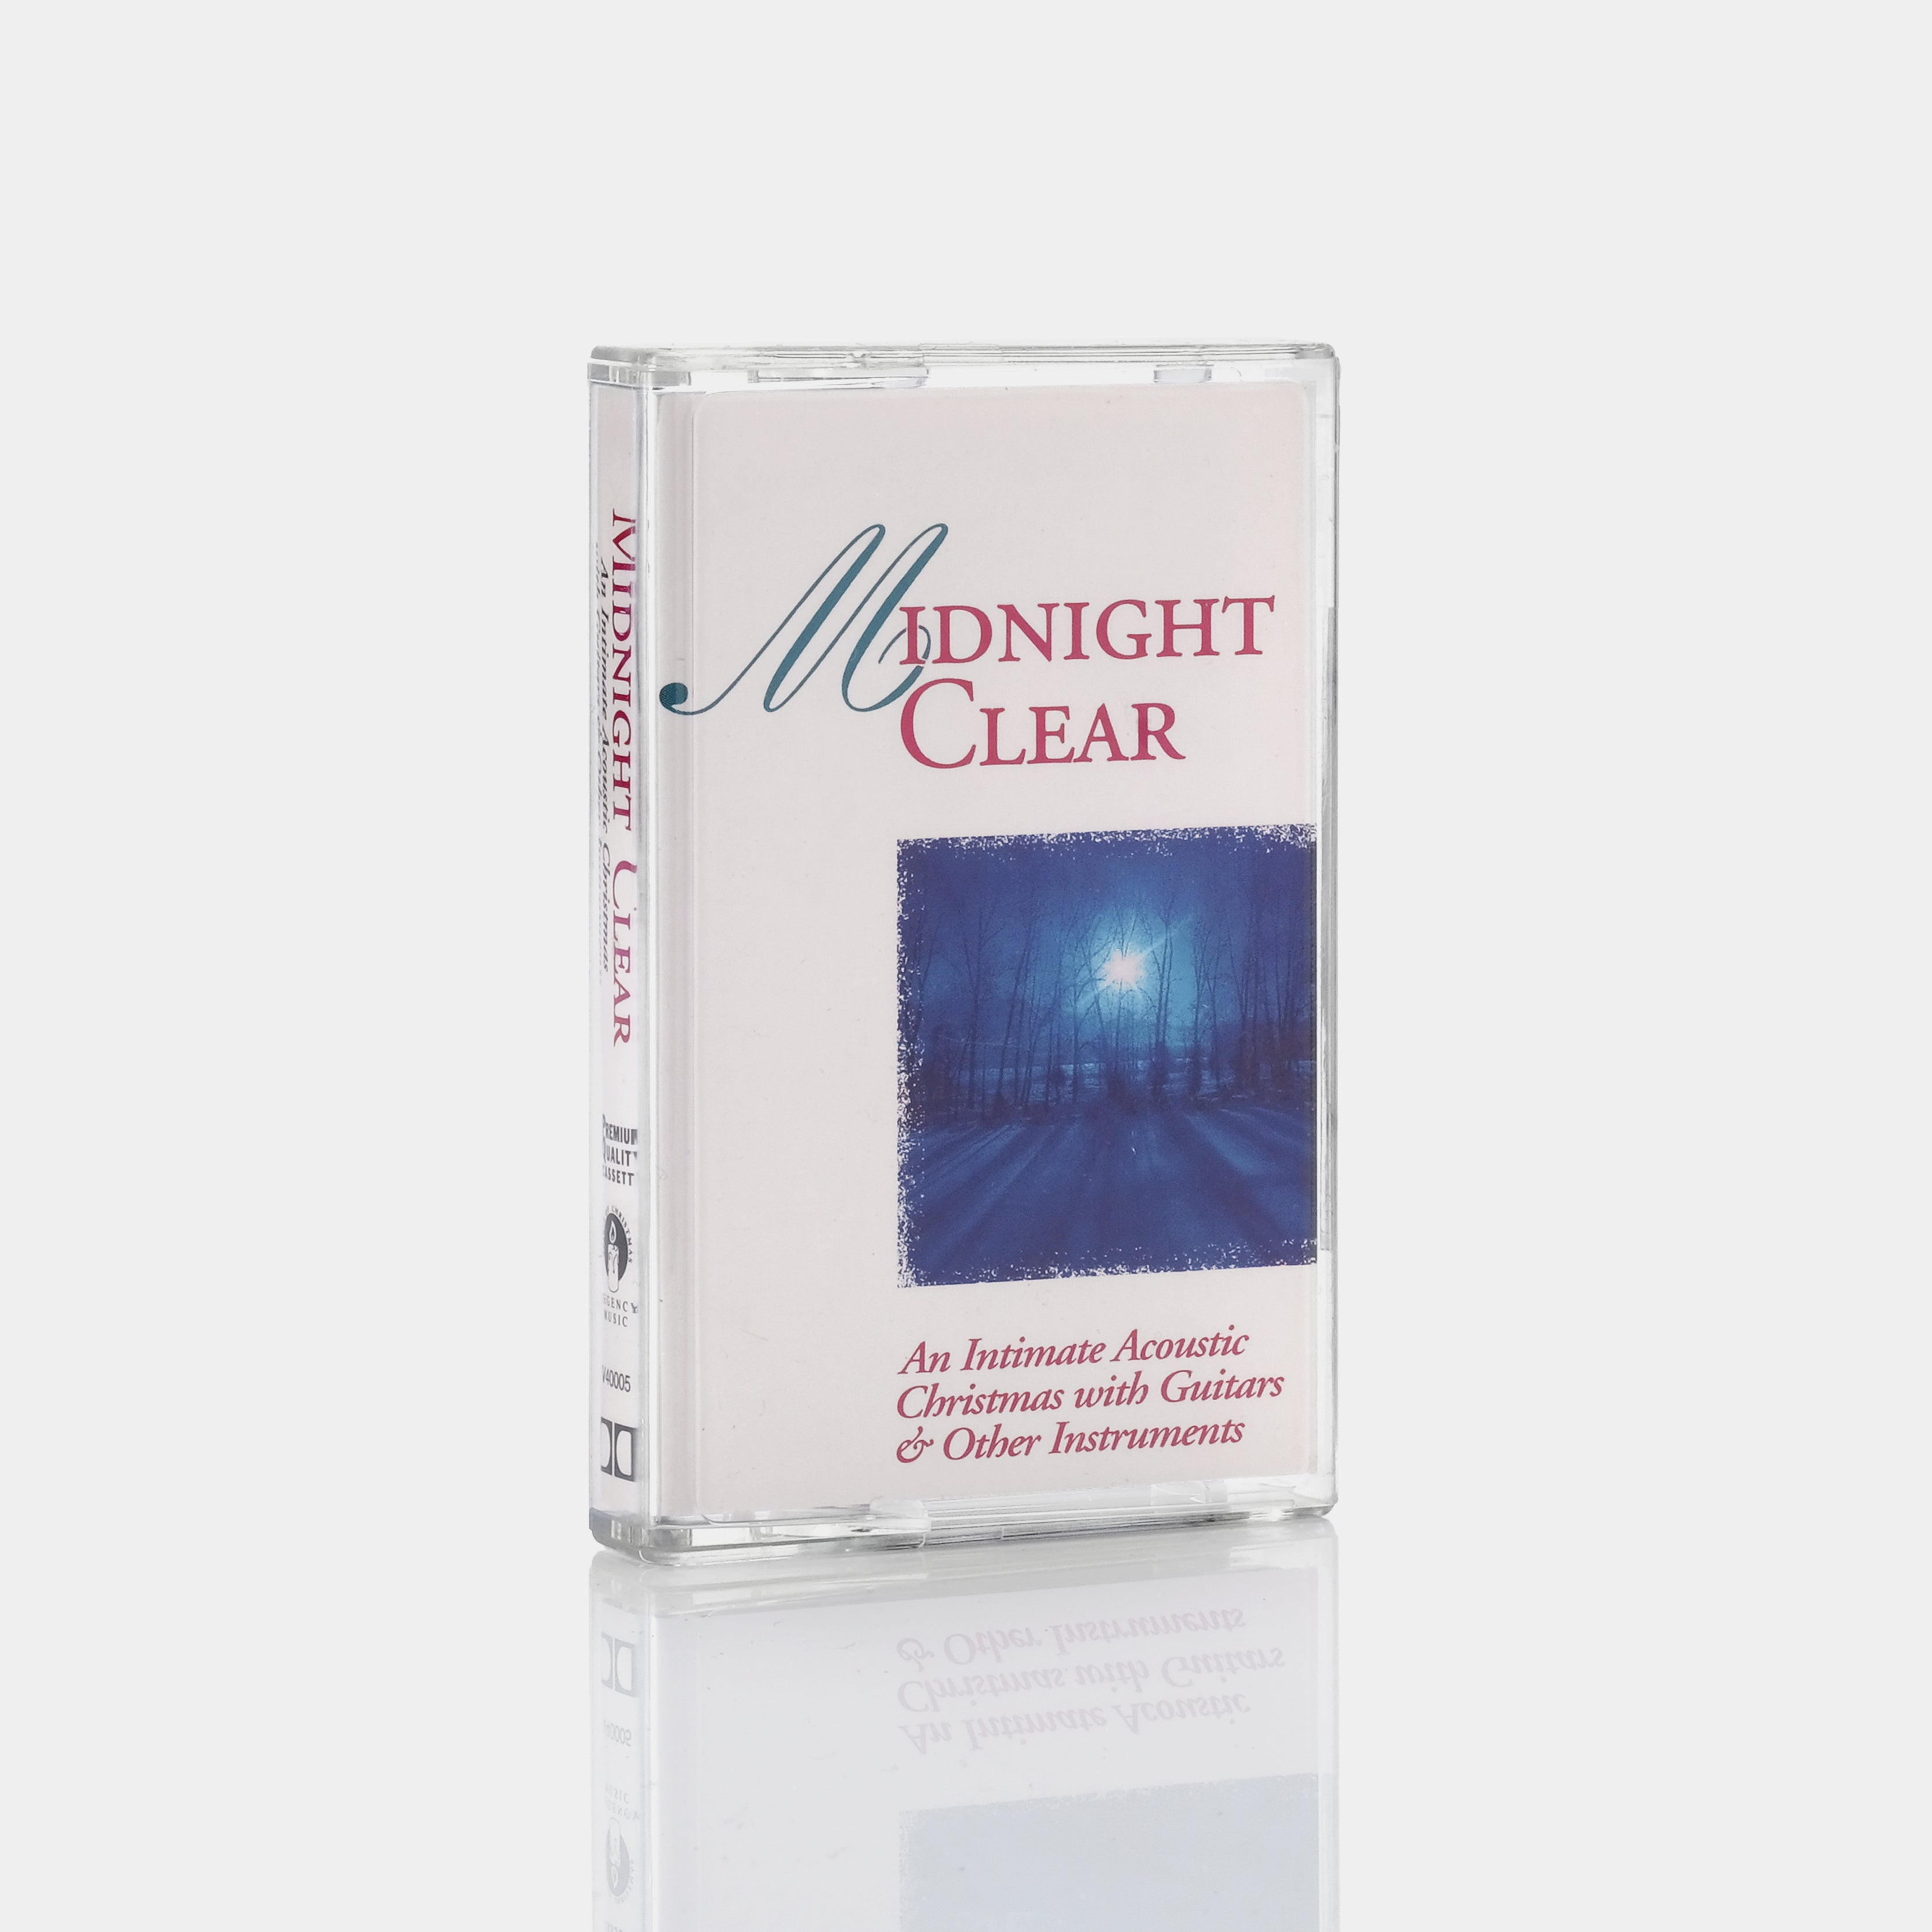 Midnight Clear (An Intimate Acoustic Christmas With Guitars & Other Instruments) Cassette Tape